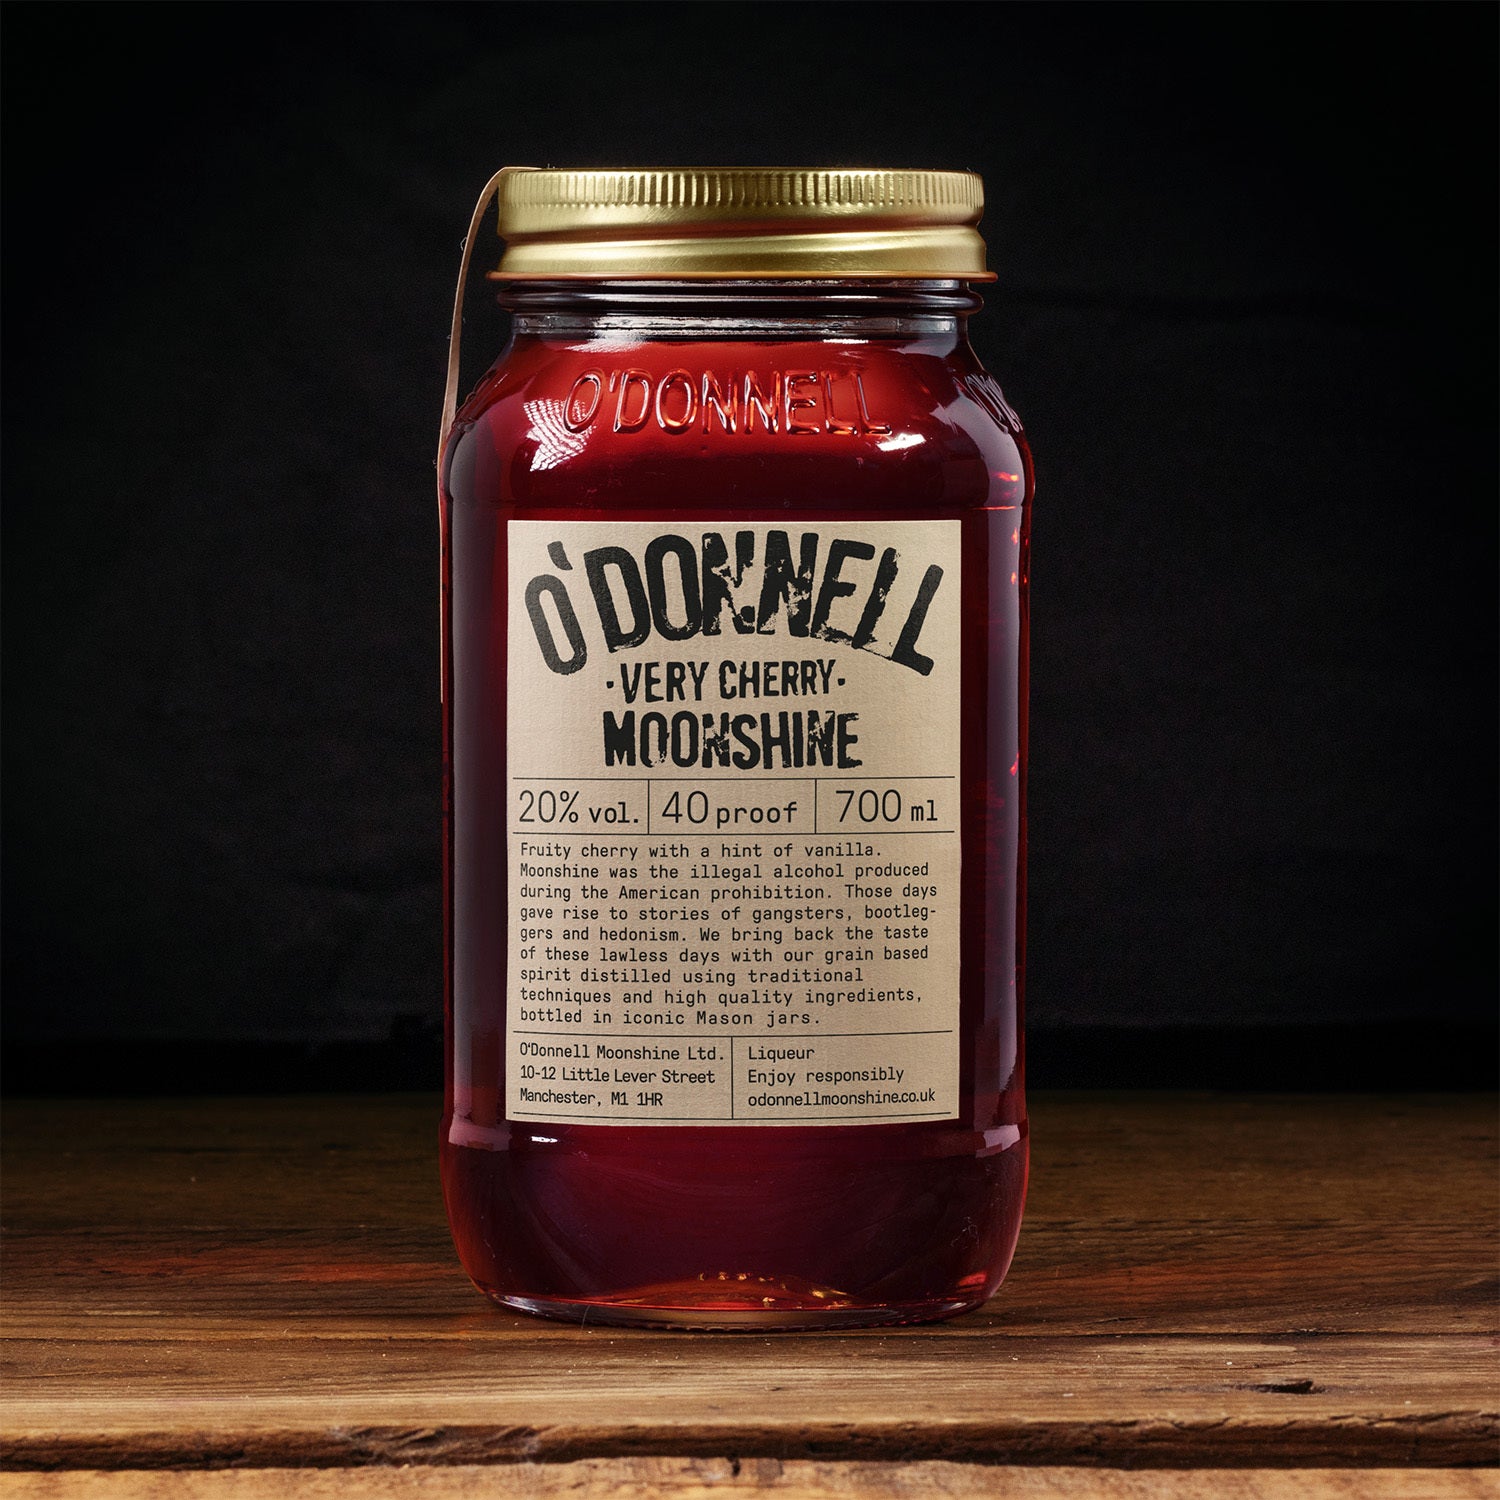 Very Cherry O'Donnell Moonshine 700ml glass